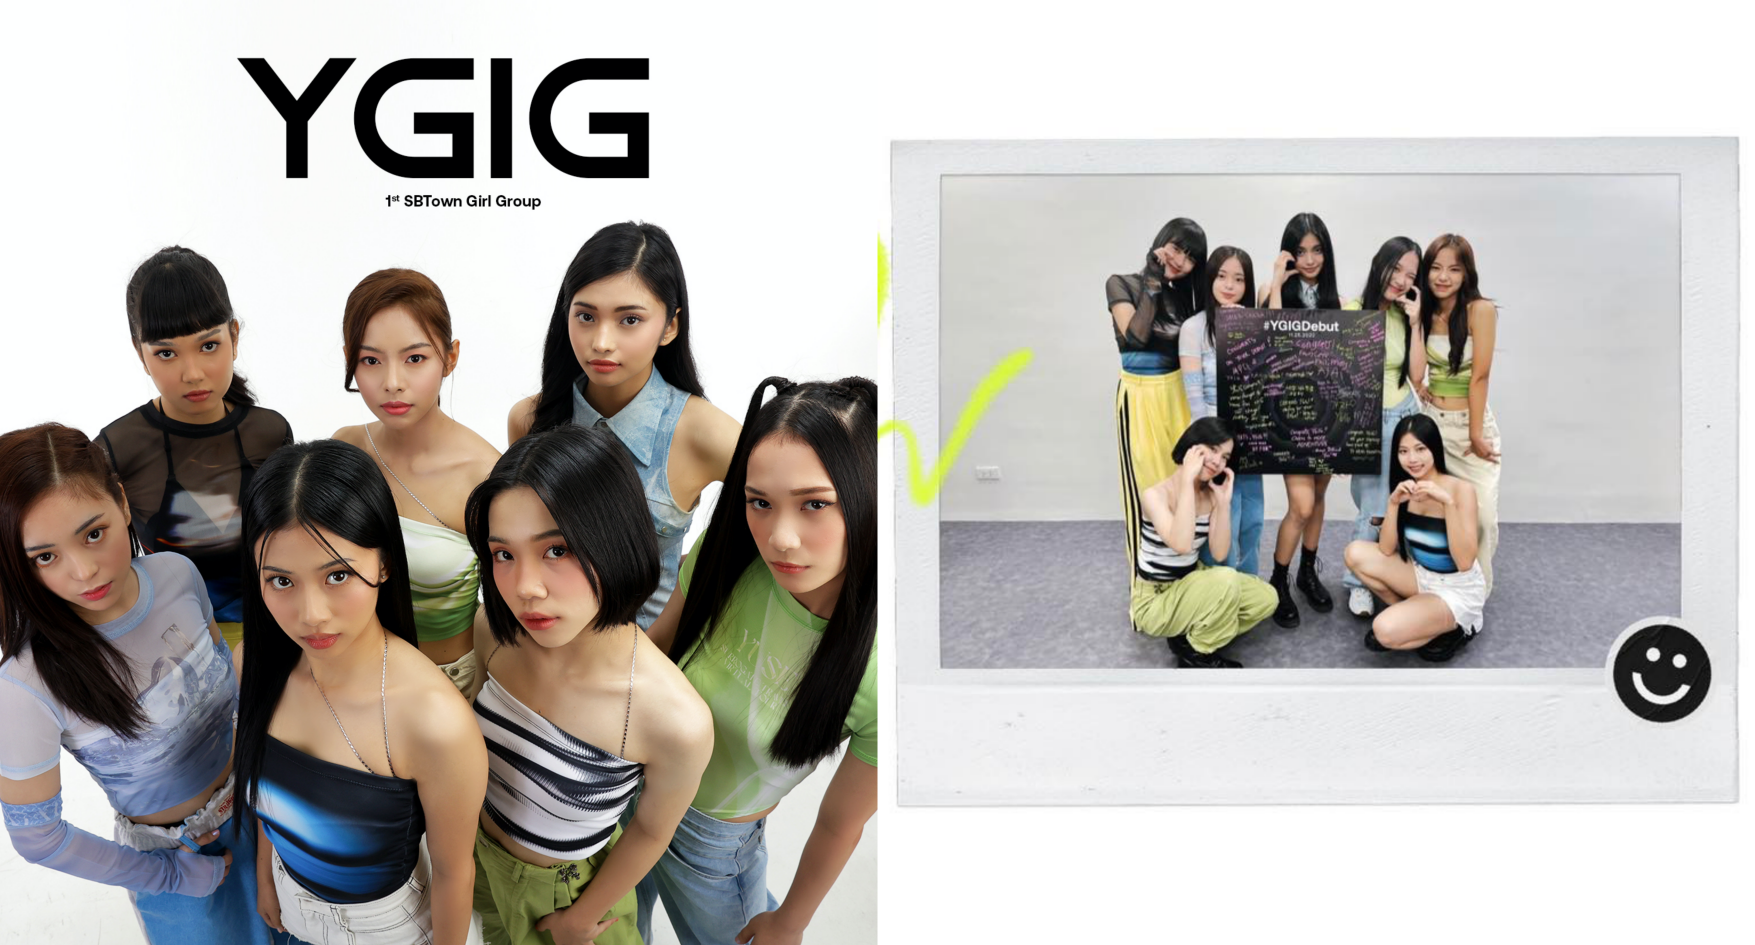 Say hello to YGIG, SBTown’s first P-pop girl group featured image